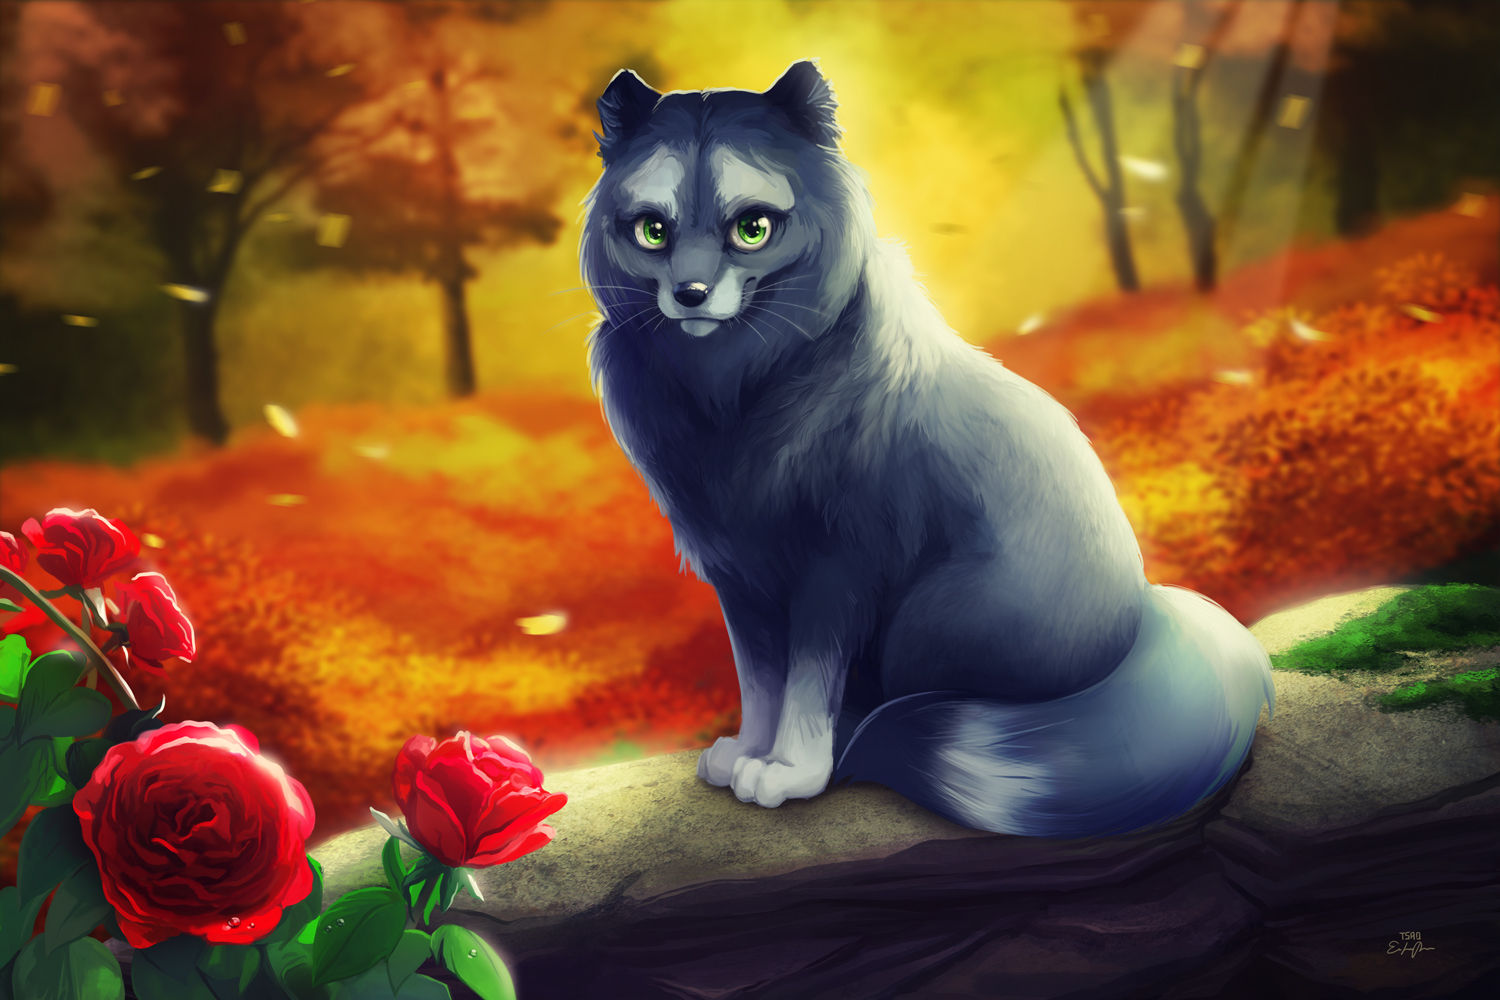 Fantasy Arctic Fox Sitting on a Rock in a Forest with Lovely Roses by Eric Proctor